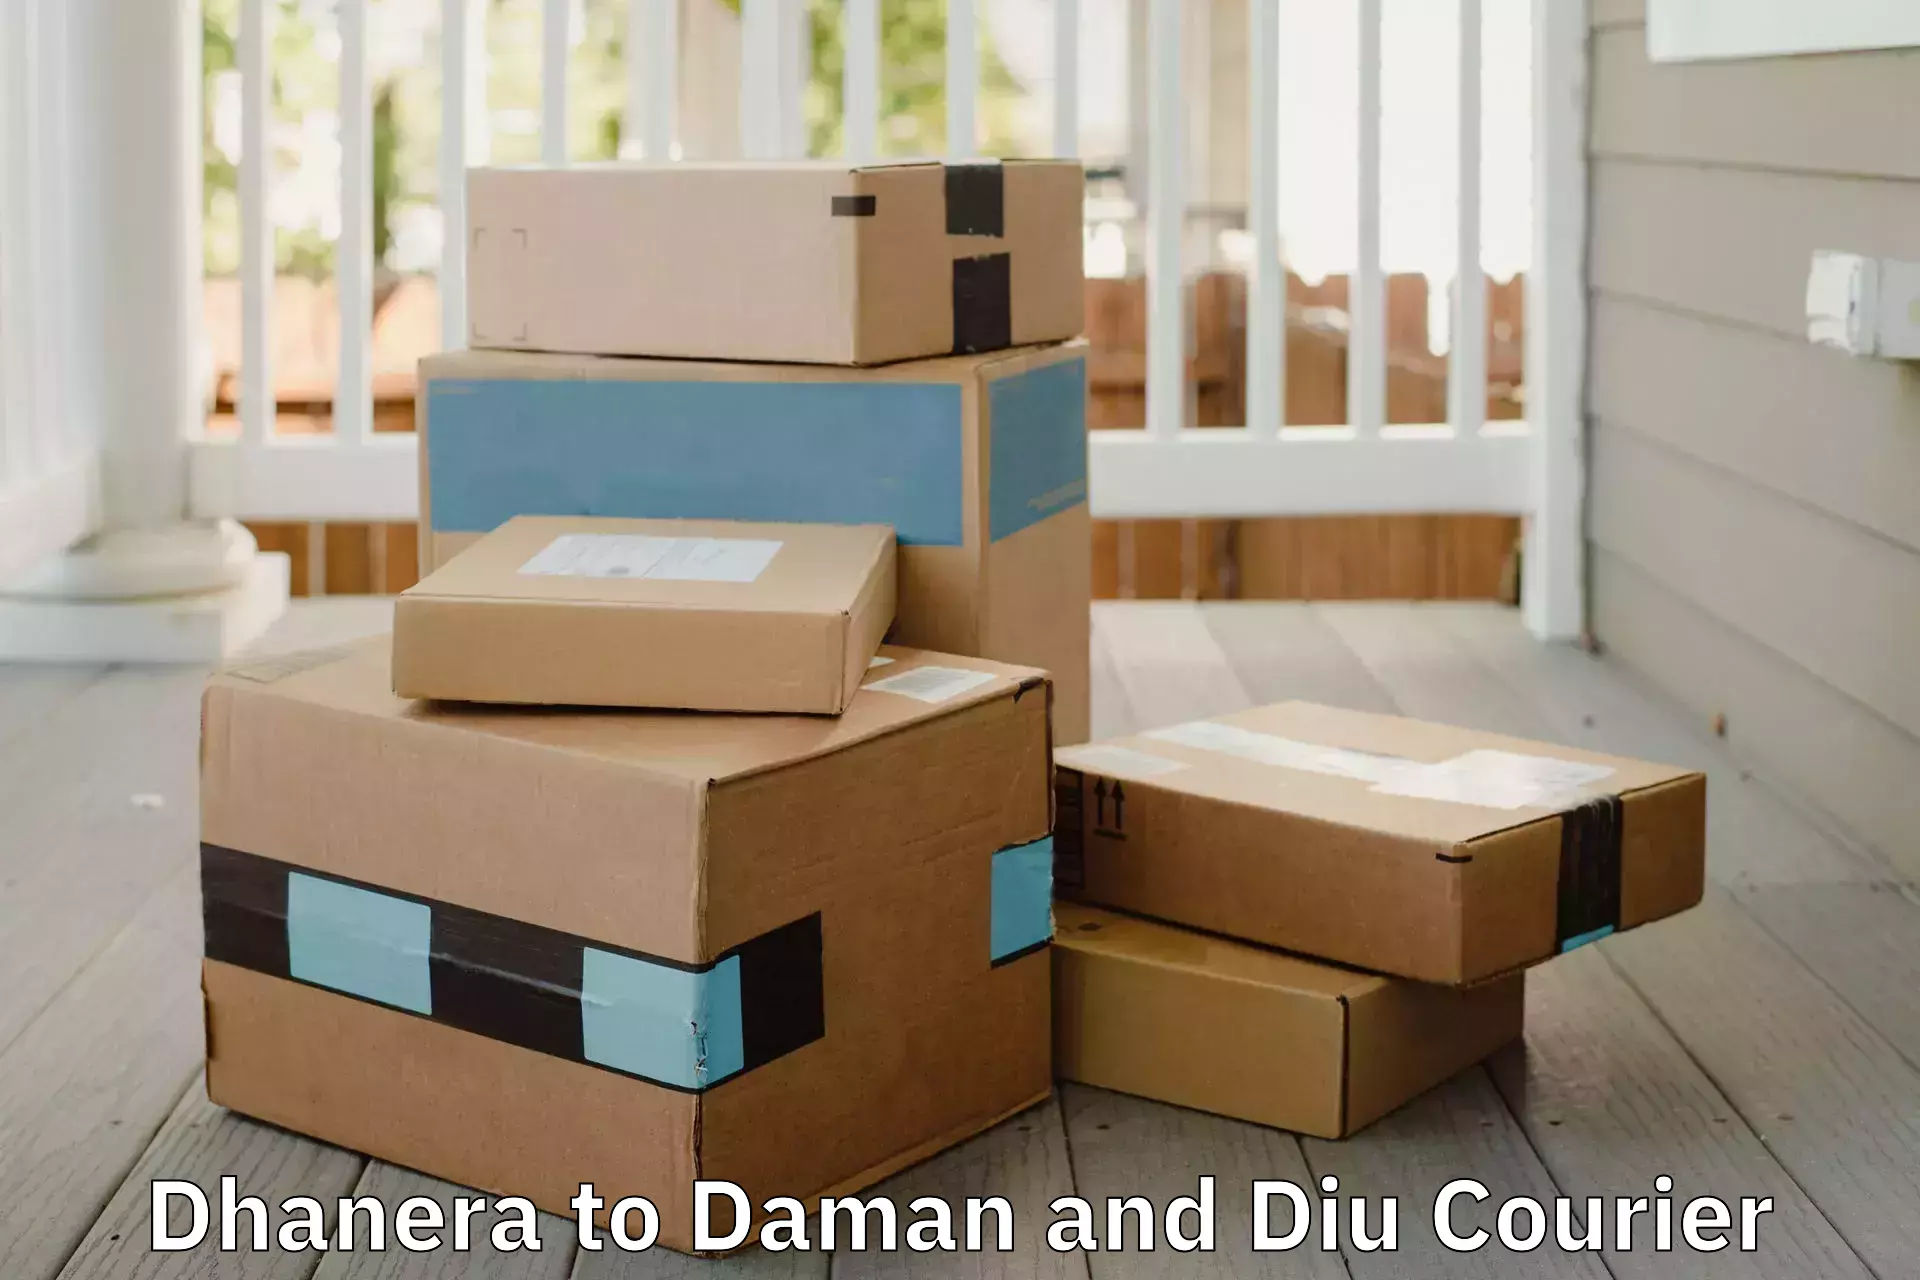 Efficient moving company in Dhanera to Daman and Diu